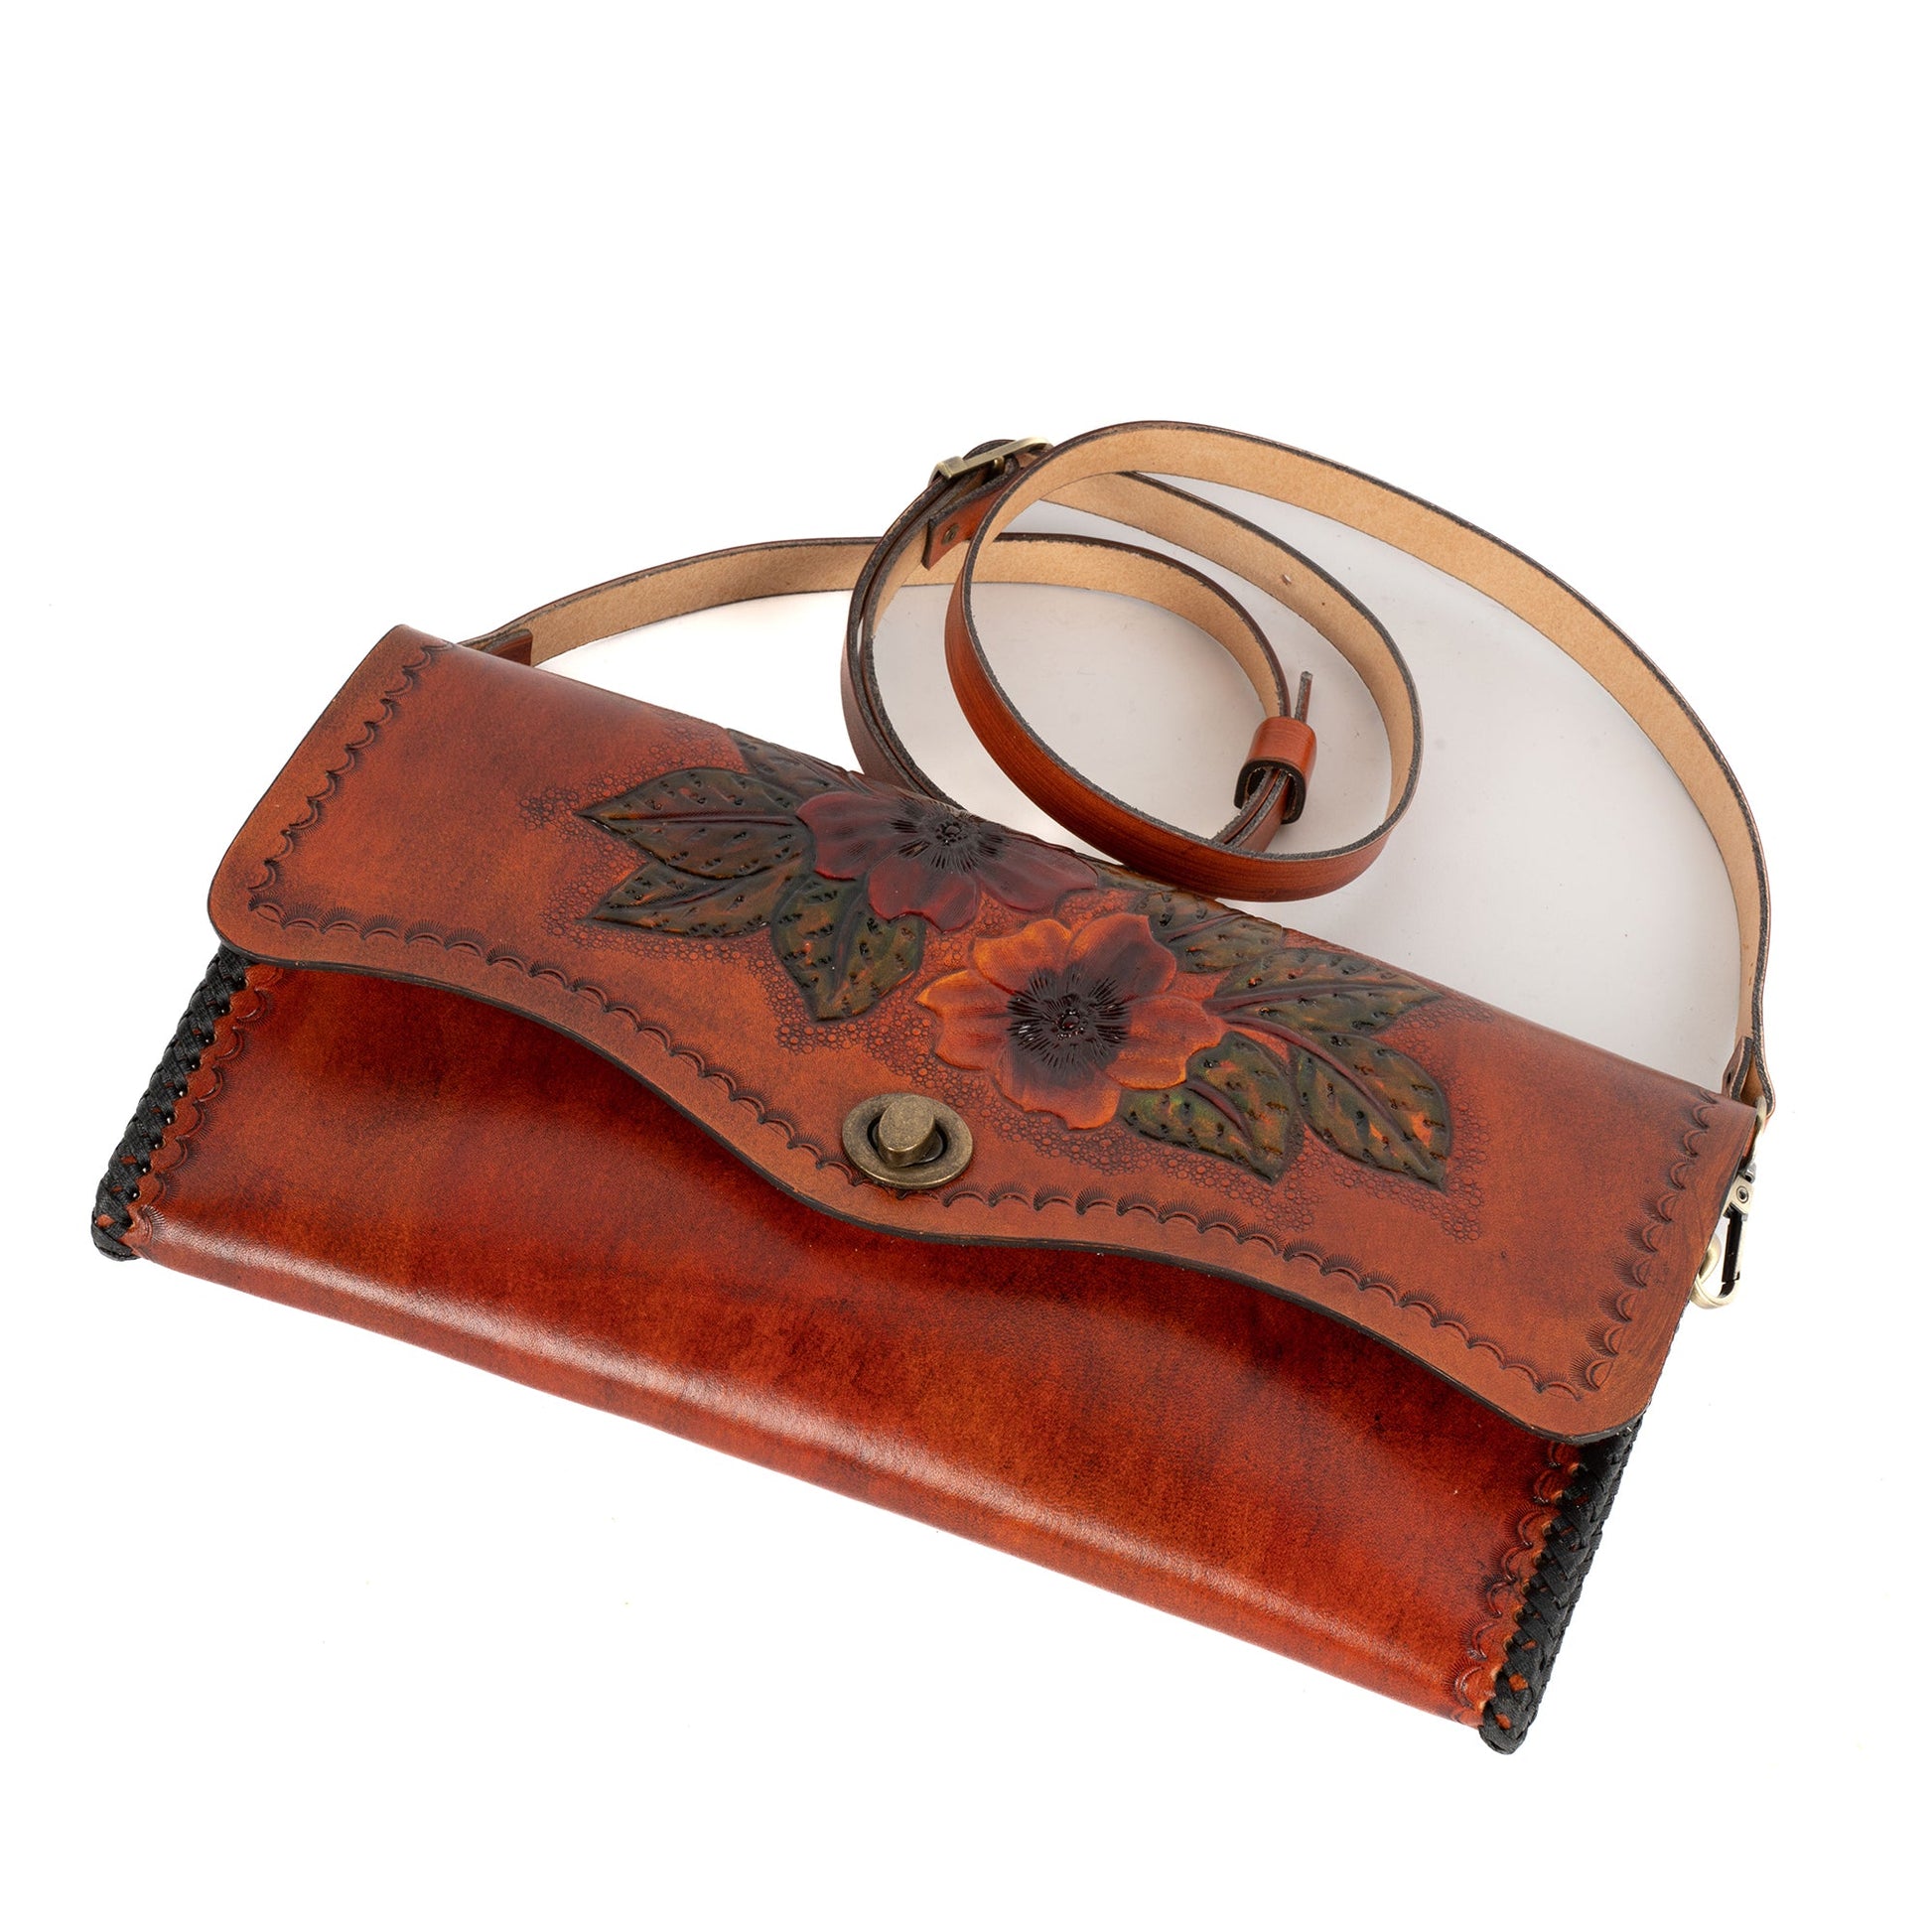 Perge Chestnut Brown Leather Carved & Crafted Hand Bag - Handbags Zengoda Shop online from Artisan Brands